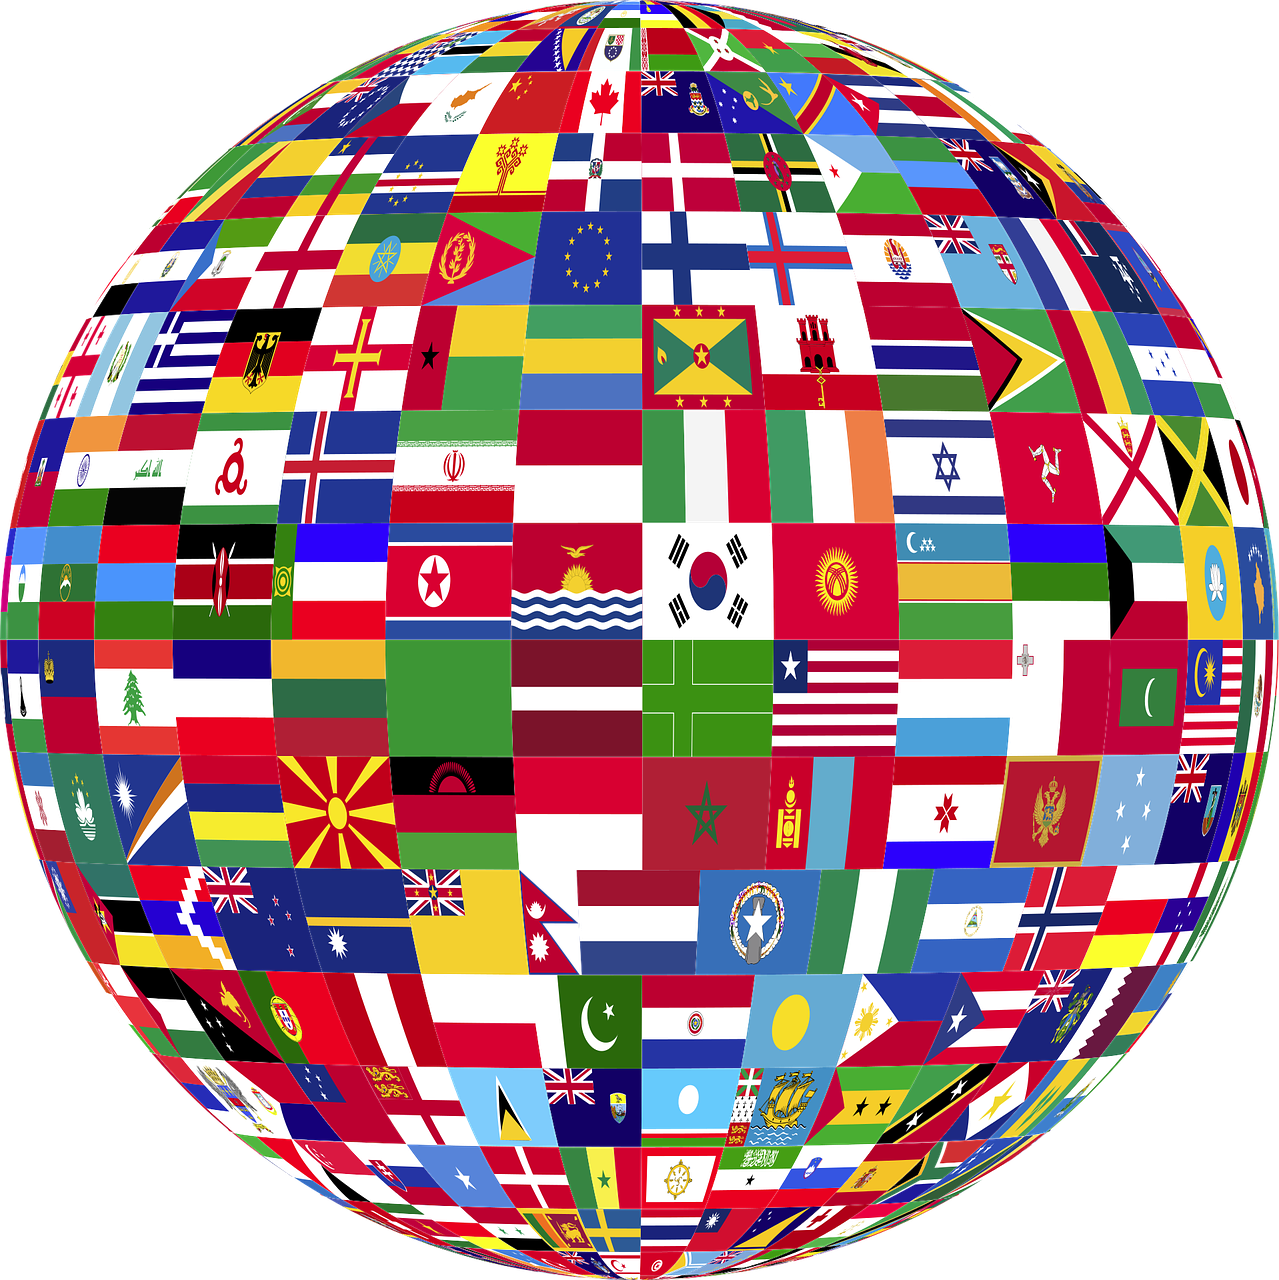 The globe made up of flags of various nations